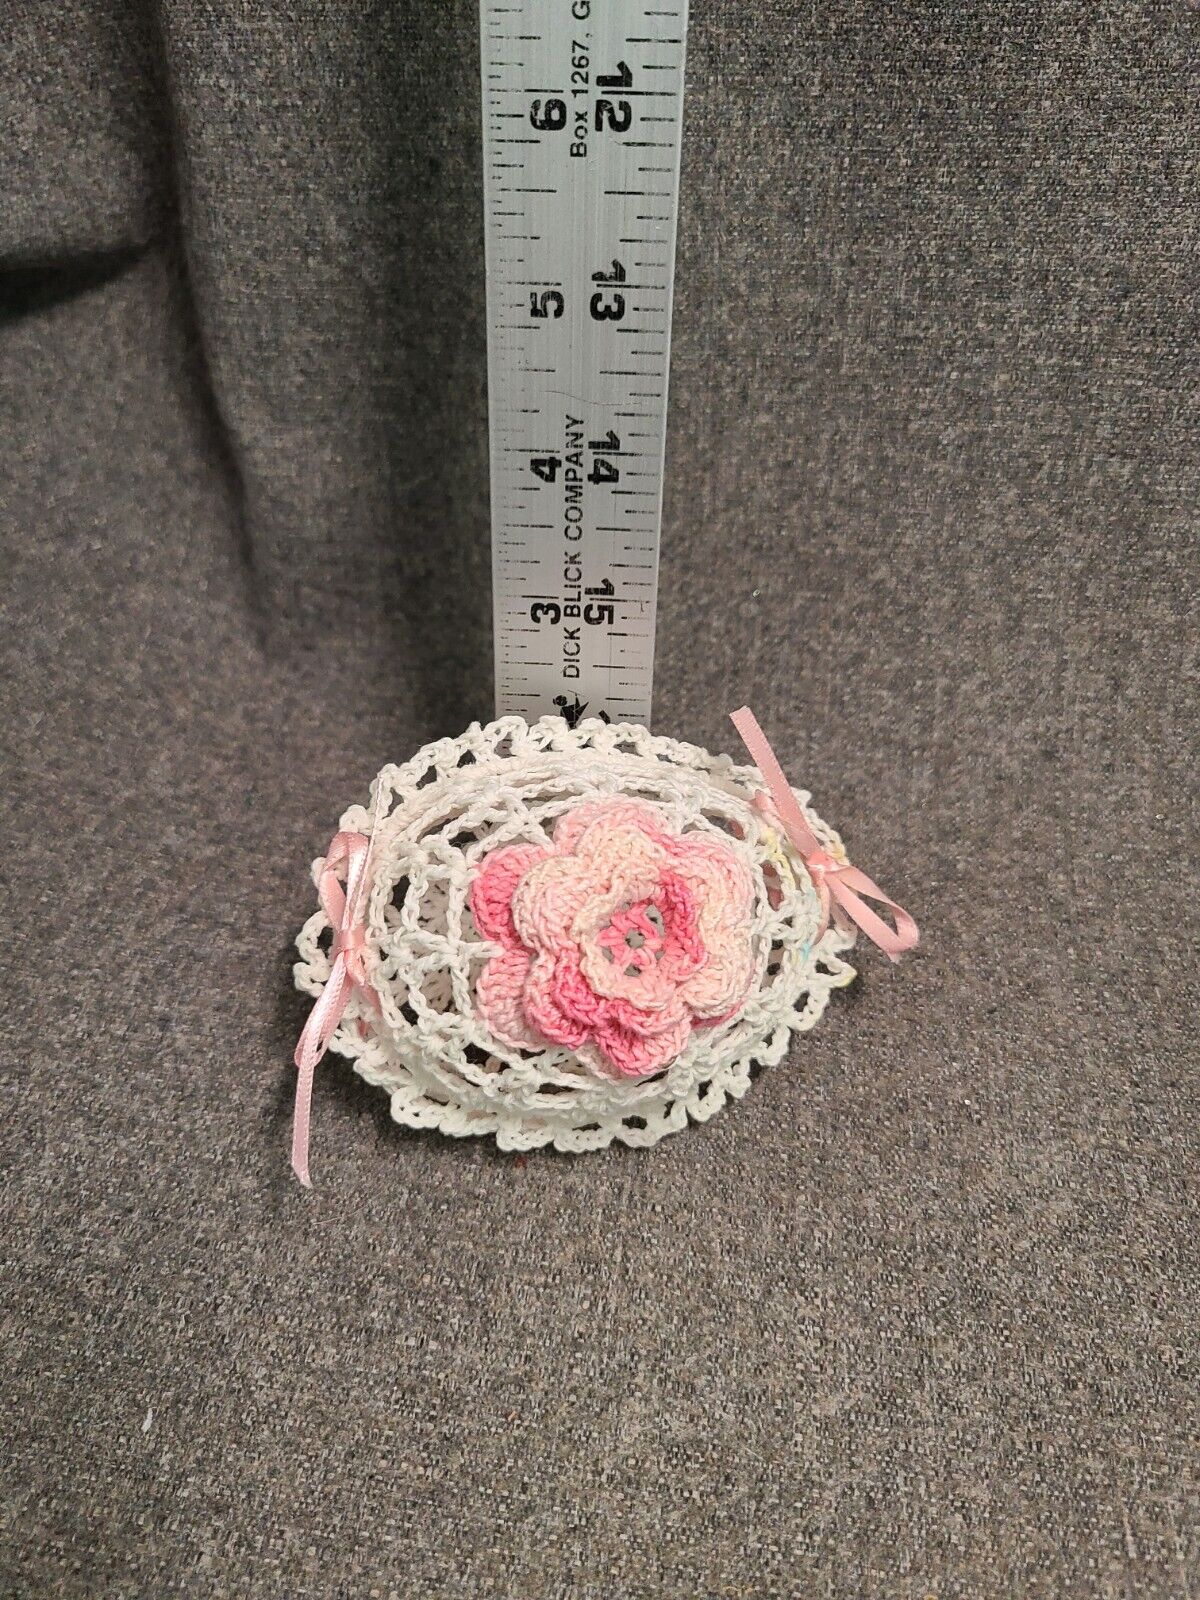 VTG Hand Crocheted Starched Lace Egg with Crocheted Pink Rose Easter Egg 